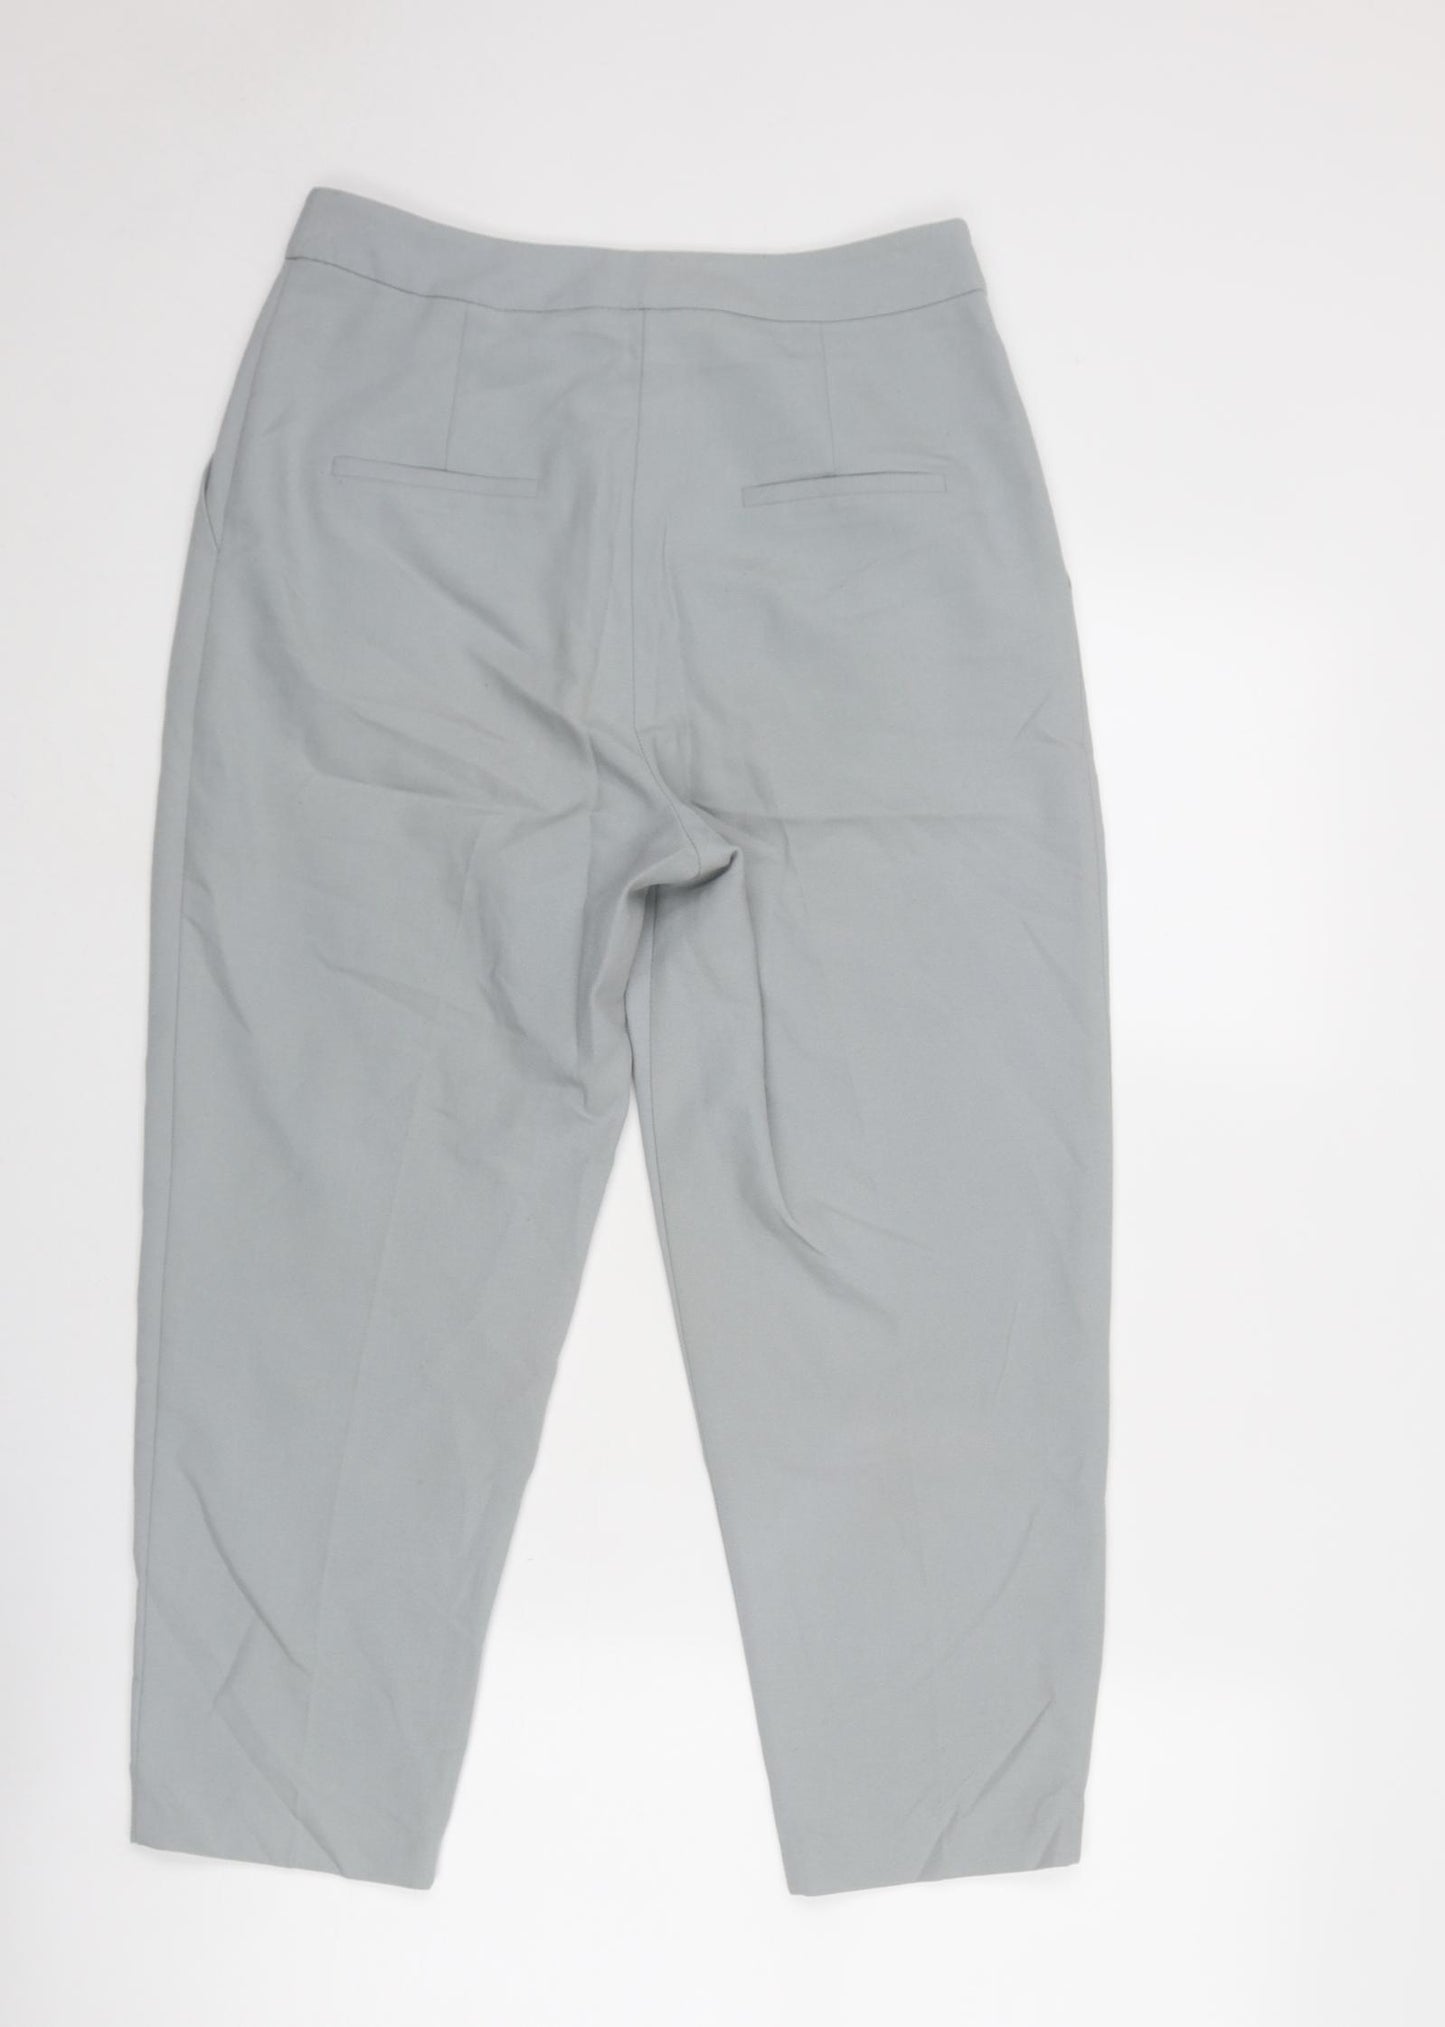 Topshop Womens Grey Polyester Chino Trousers Size 10 Regular Zip